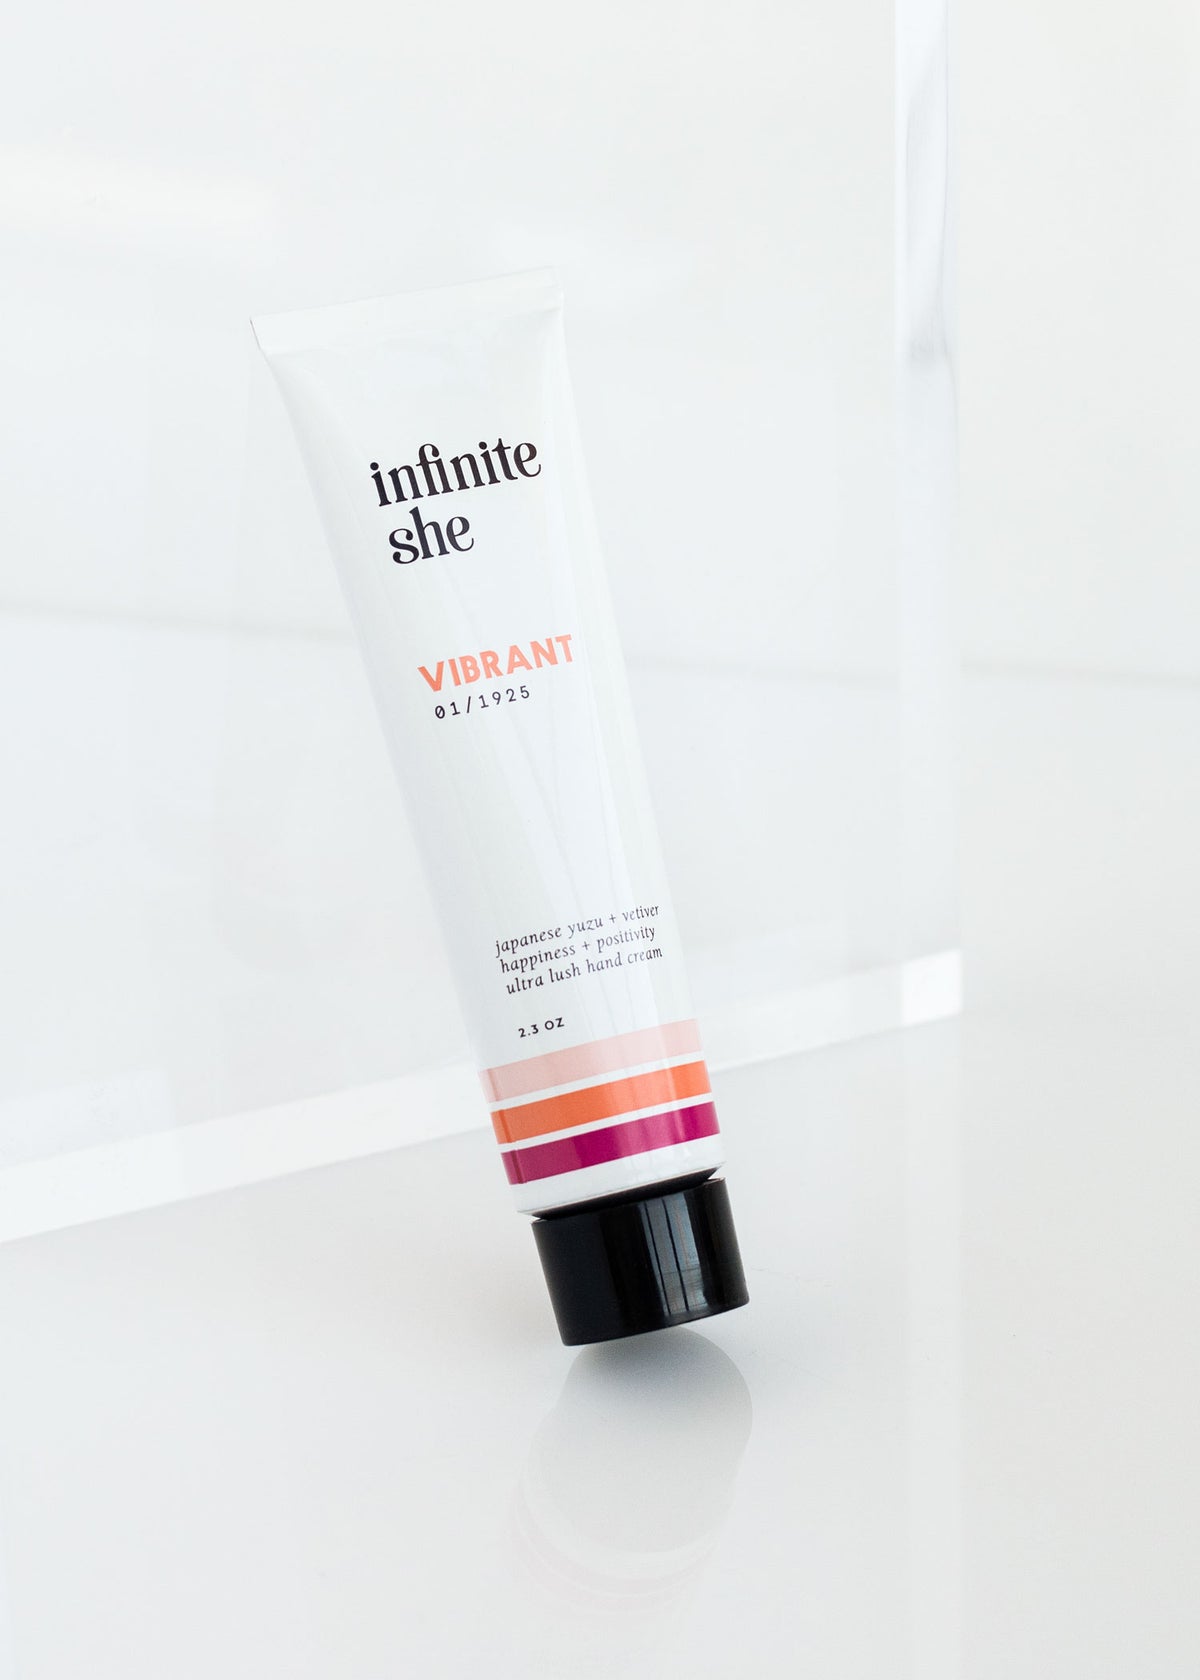 A tube of Margot Elena's "Infinite She Vibrant Ultra Lush Hand Cream" placed upright on a shiny, reflective white surface, with a minimalist background. The tube has a white body with black cap and pink-striped design.